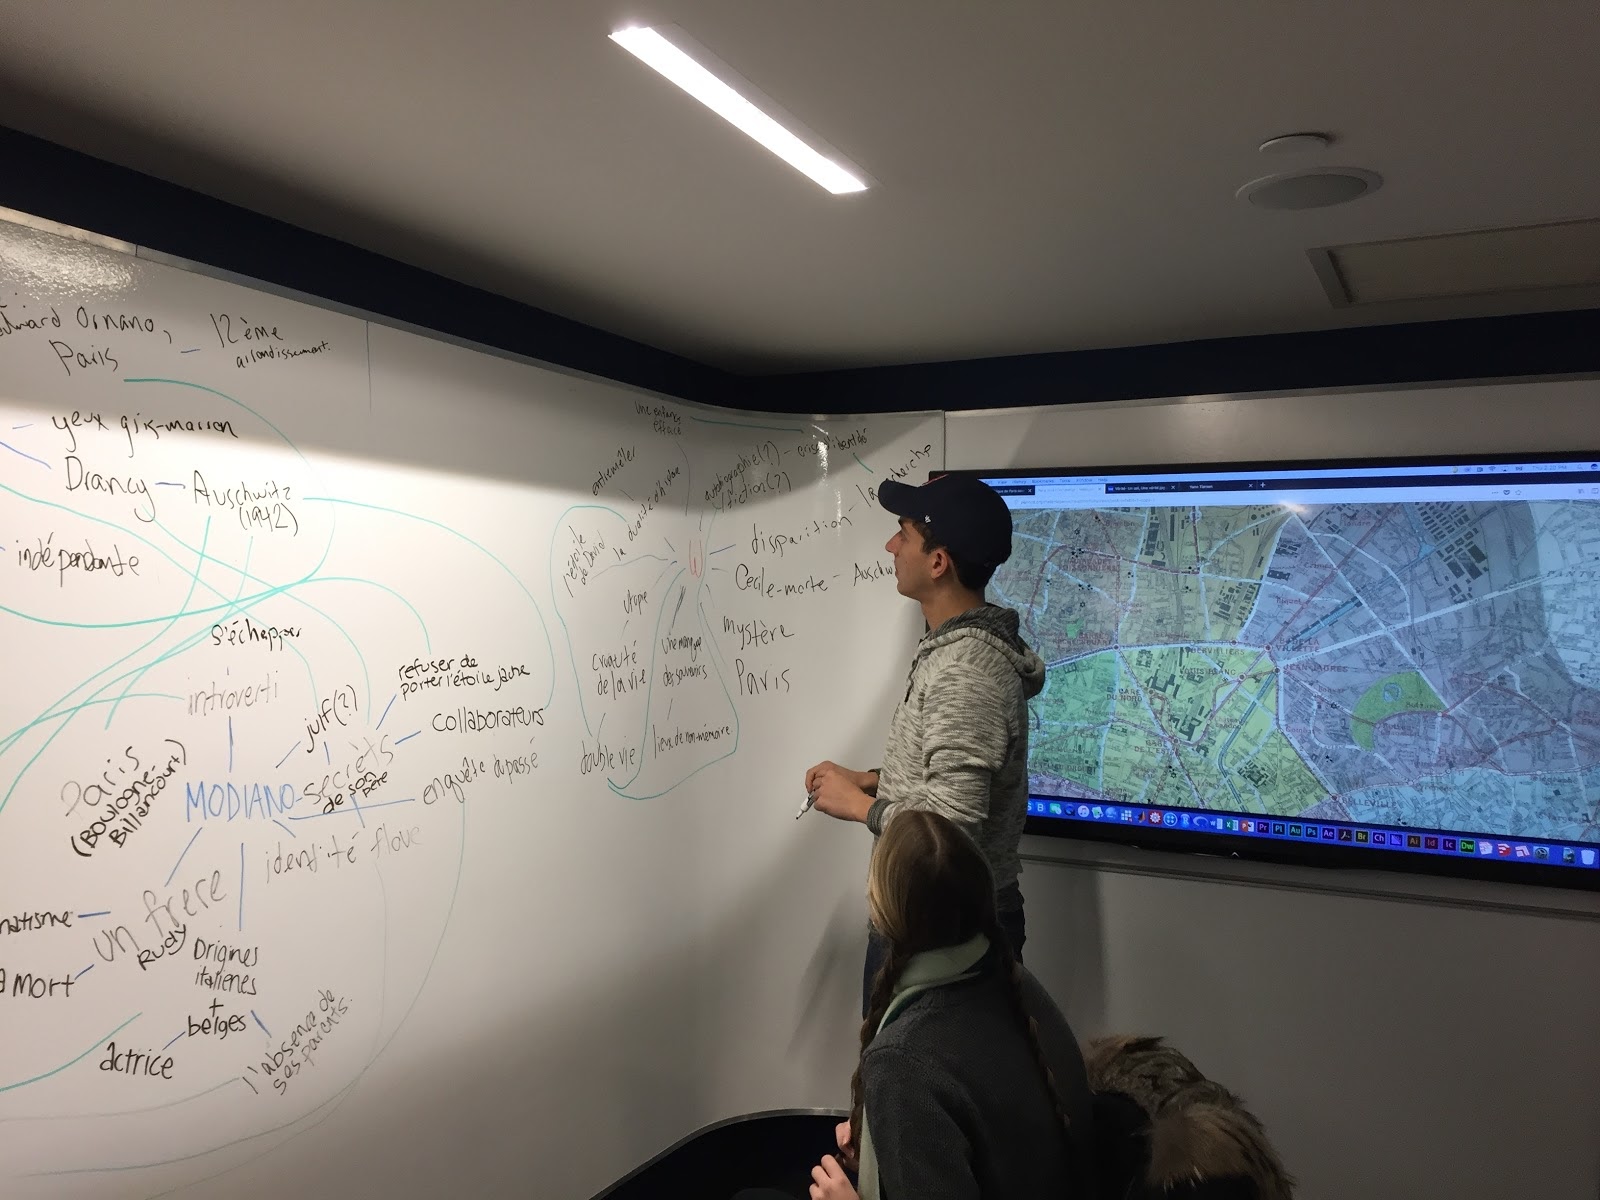 Person stands at a whiteboard covered in a word cloud, a map is projected on the wall beside them.